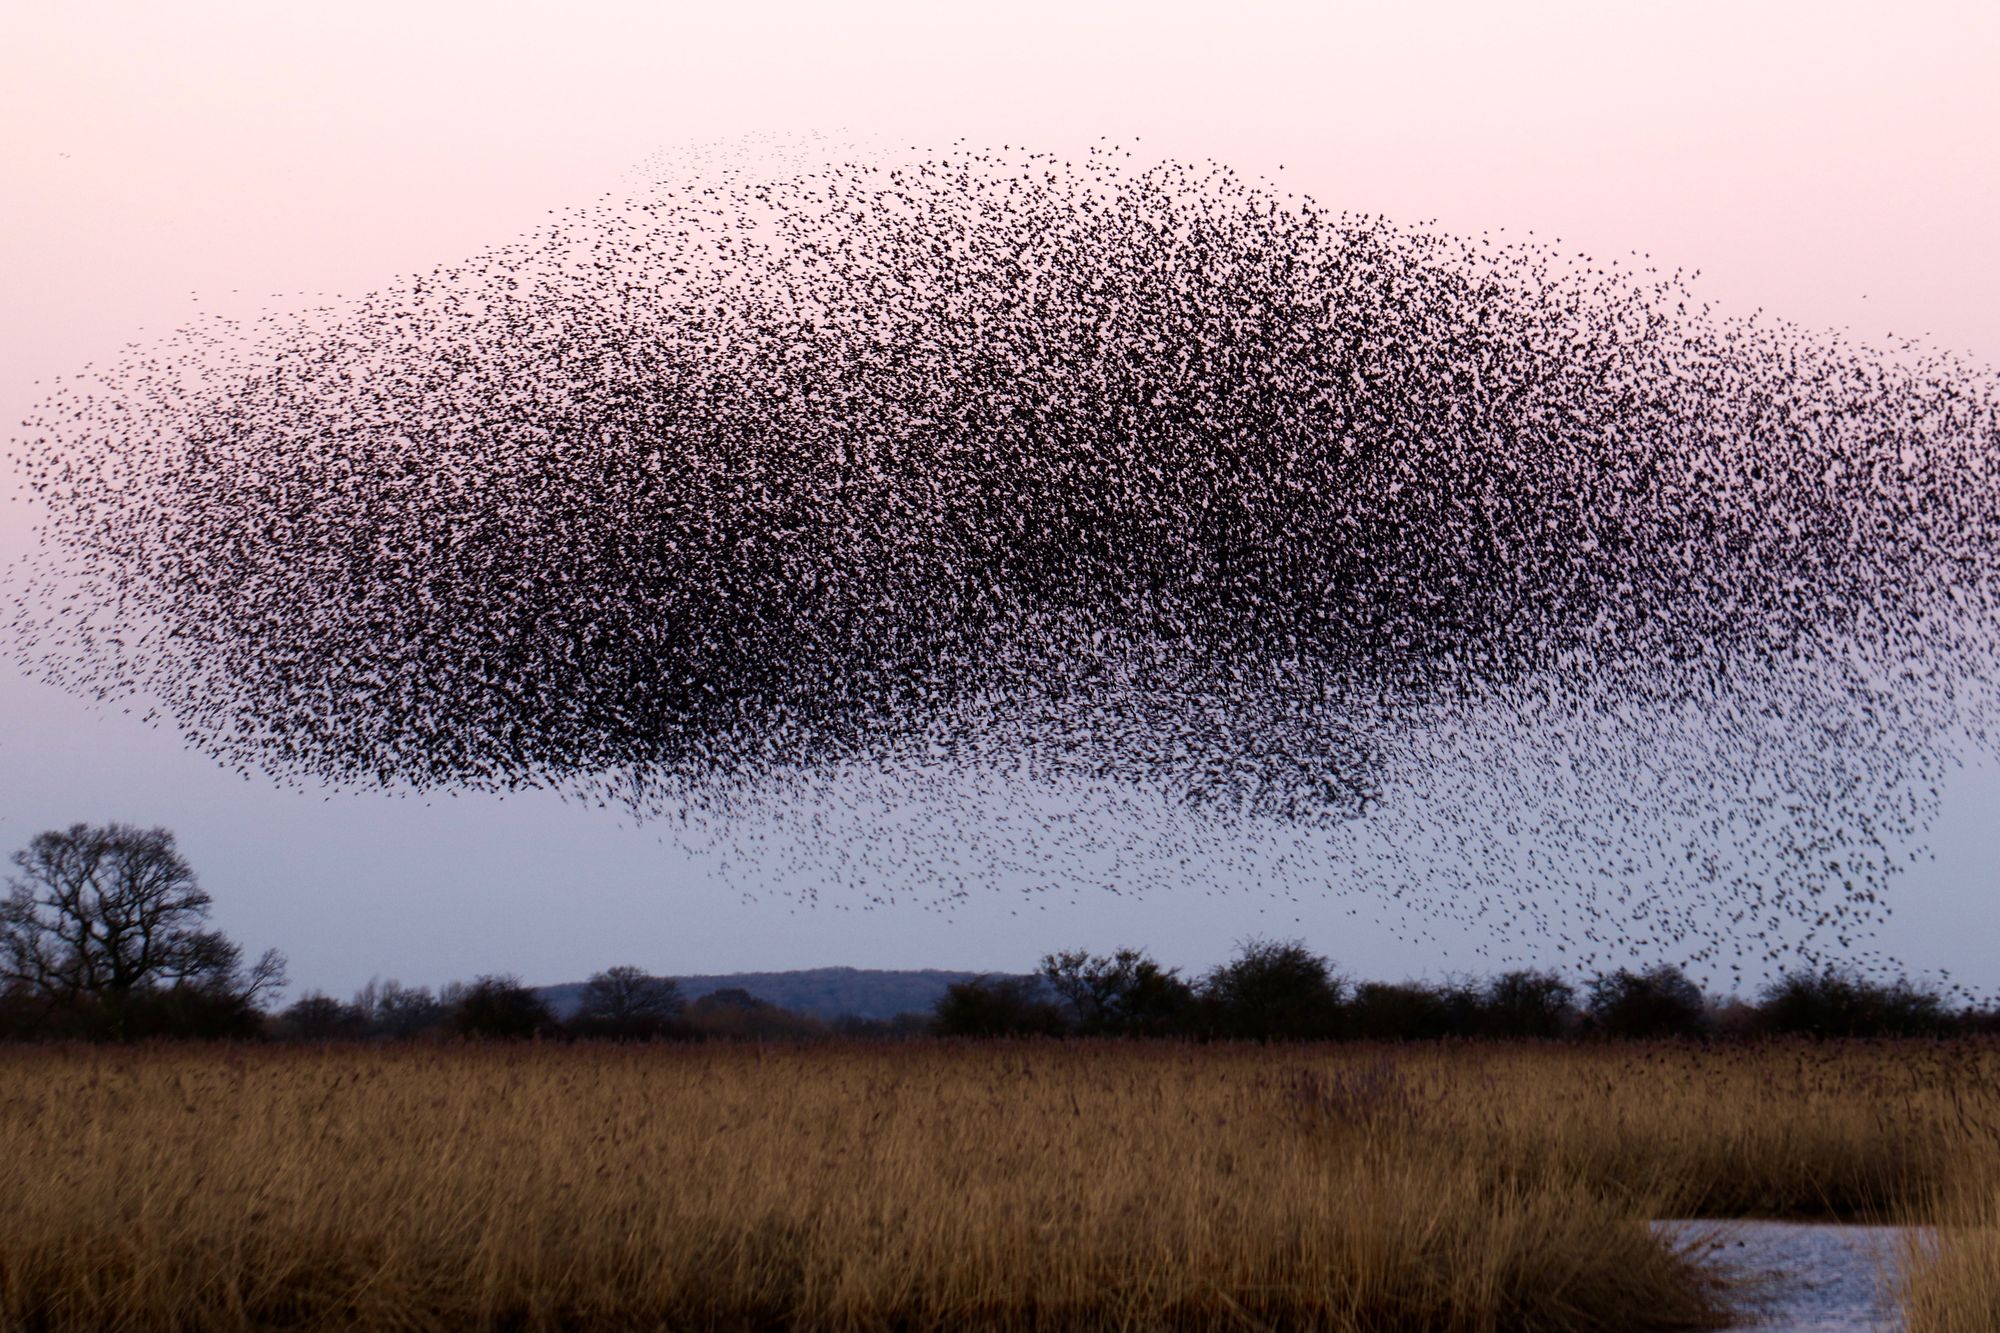 A flock of birds swarming together above a meadow